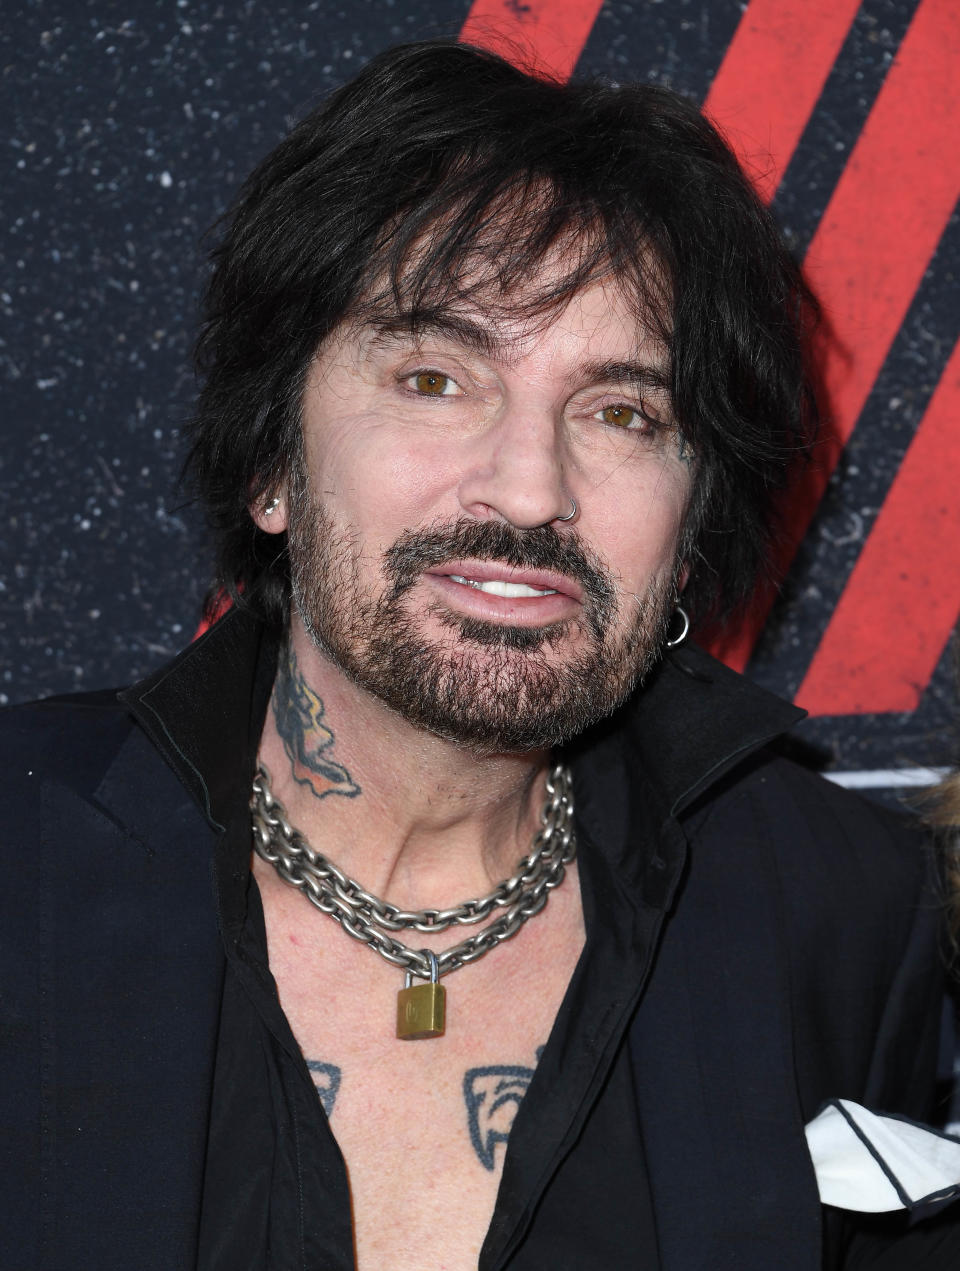 HOLLYWOOD, CALIFORNIA - MARCH 18: Tommy Lee arrives at the Premiere Of Netflix's "The Dirt" at ArcLight Hollywood on March 18, 2019 in Hollywood, California. (Photo by Steve Granitz/WireImage)